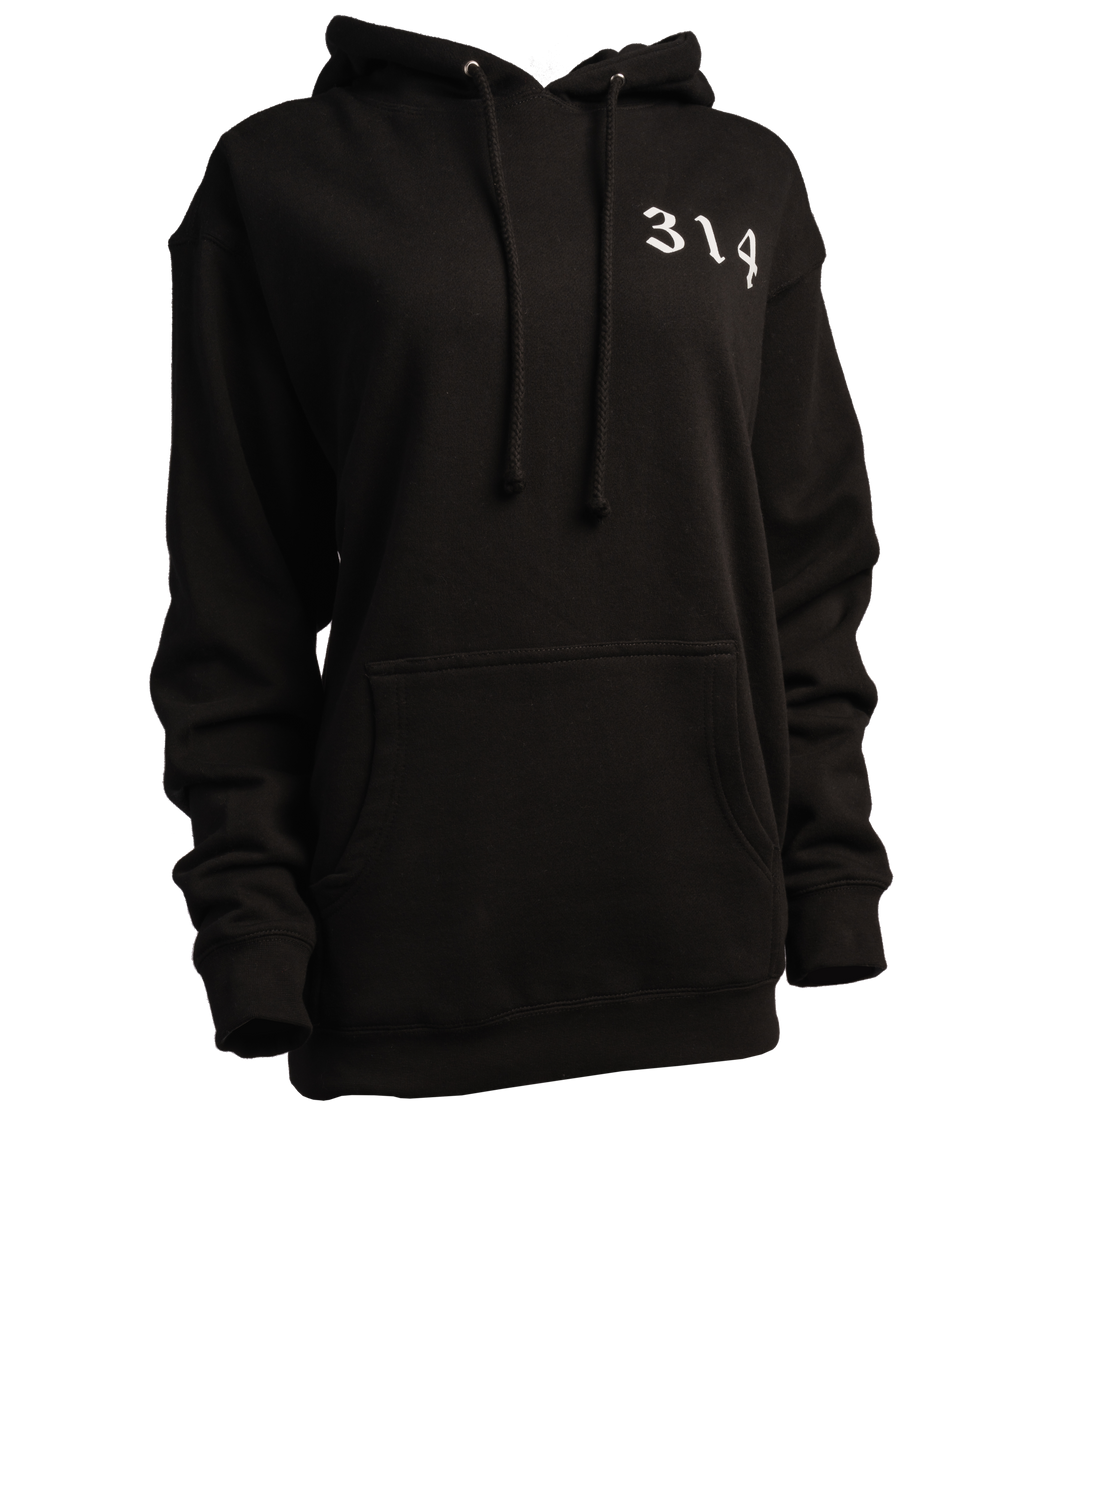 God Bless The 314 Hoodie